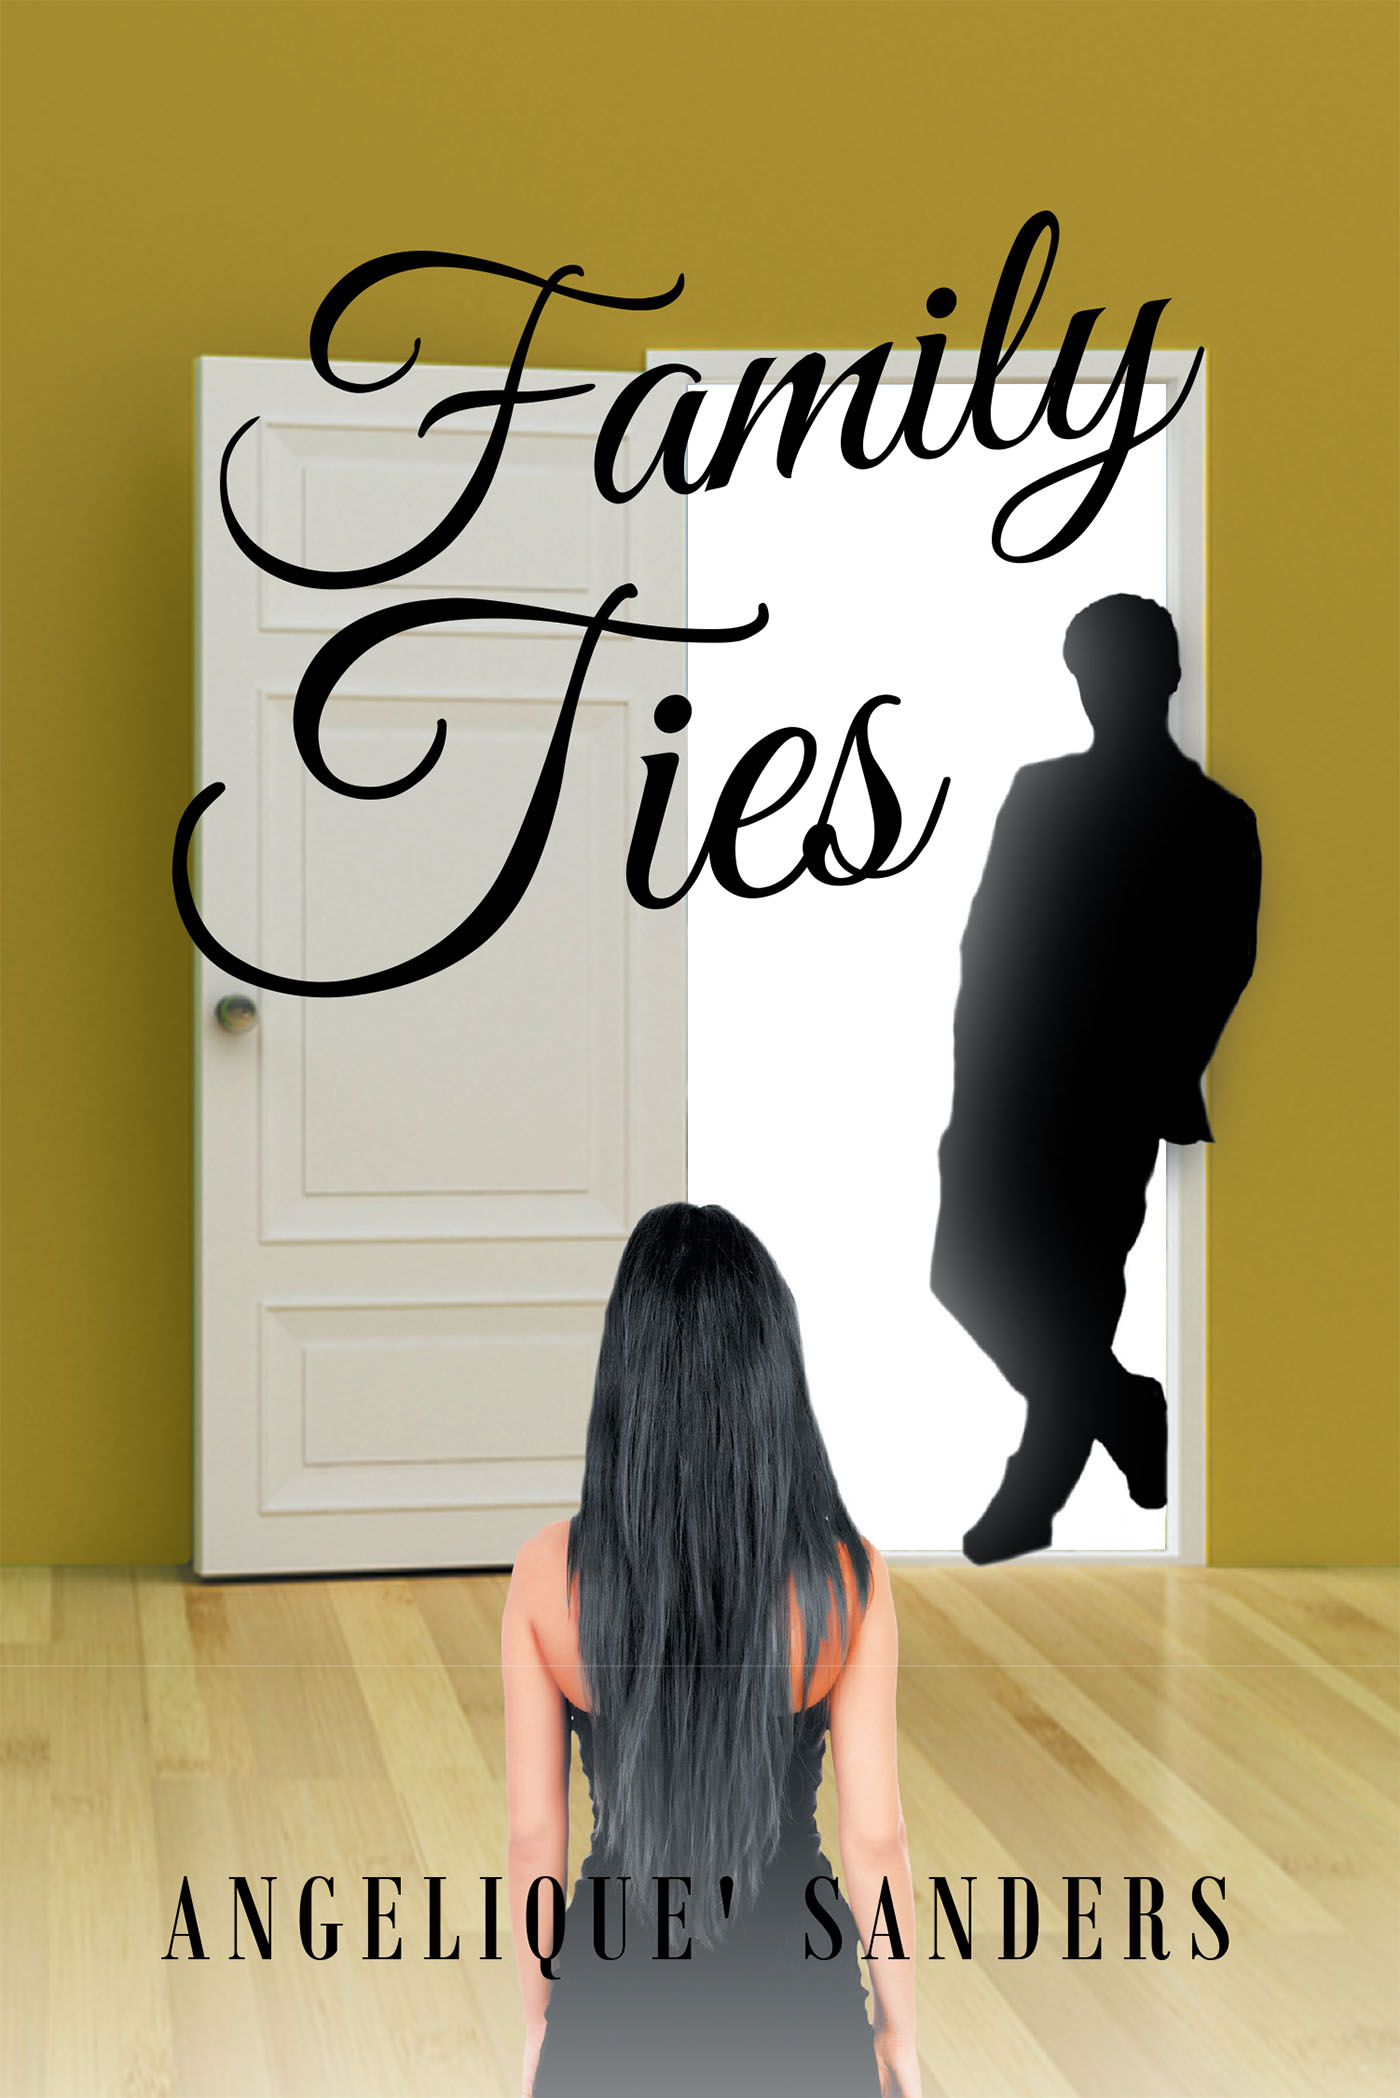 Family Ties Cover Image